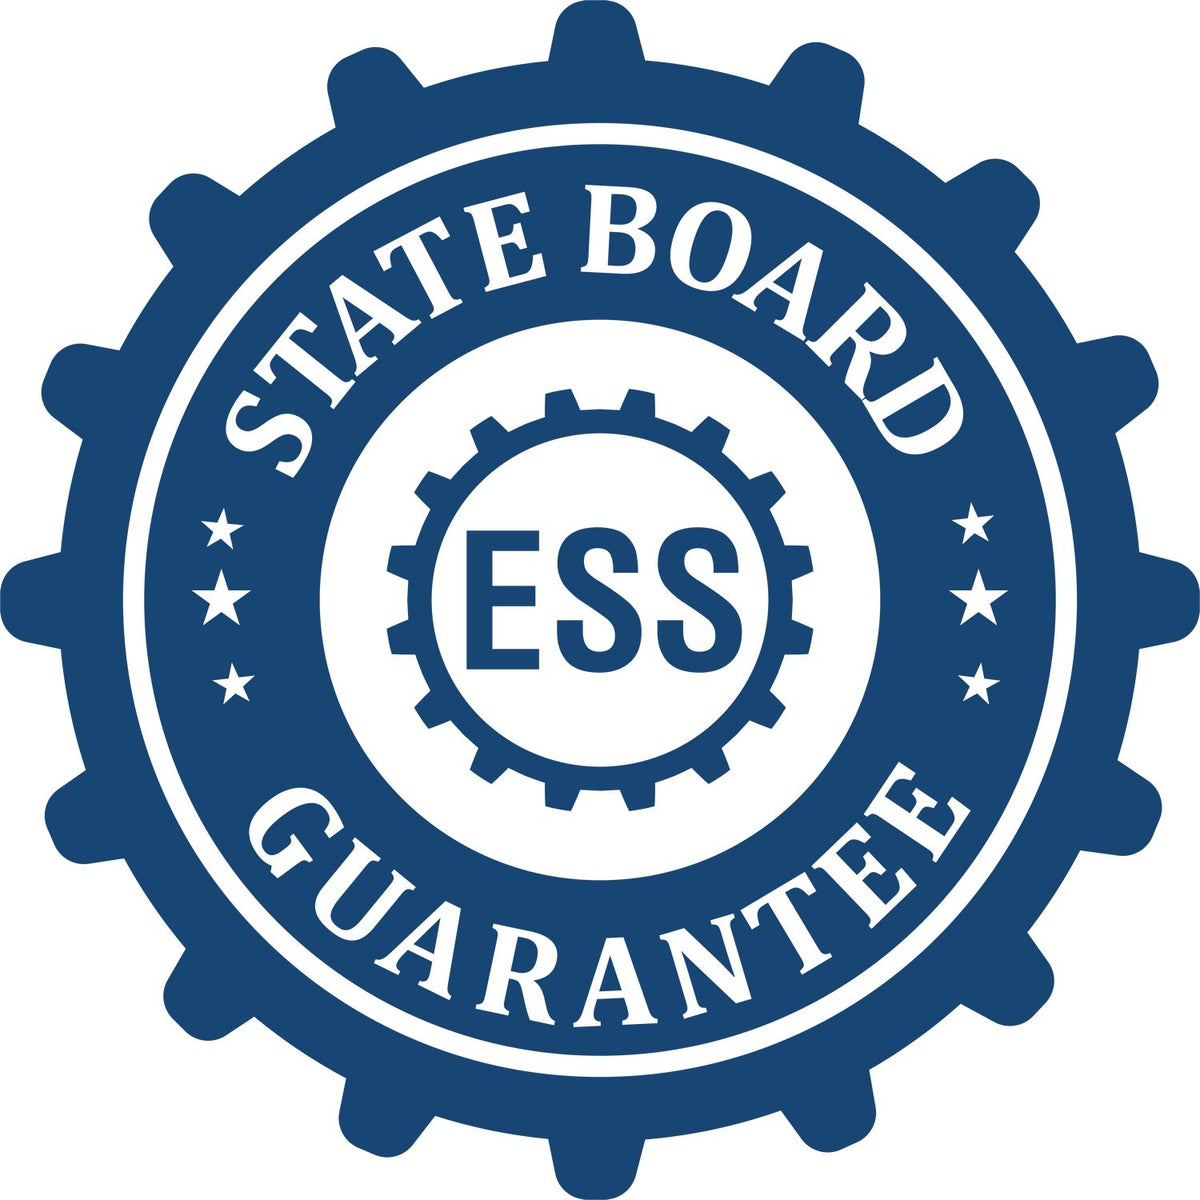 An emblem in a gear shape illustrating a state board guarantee for the Hybrid Texas Geologist Seal